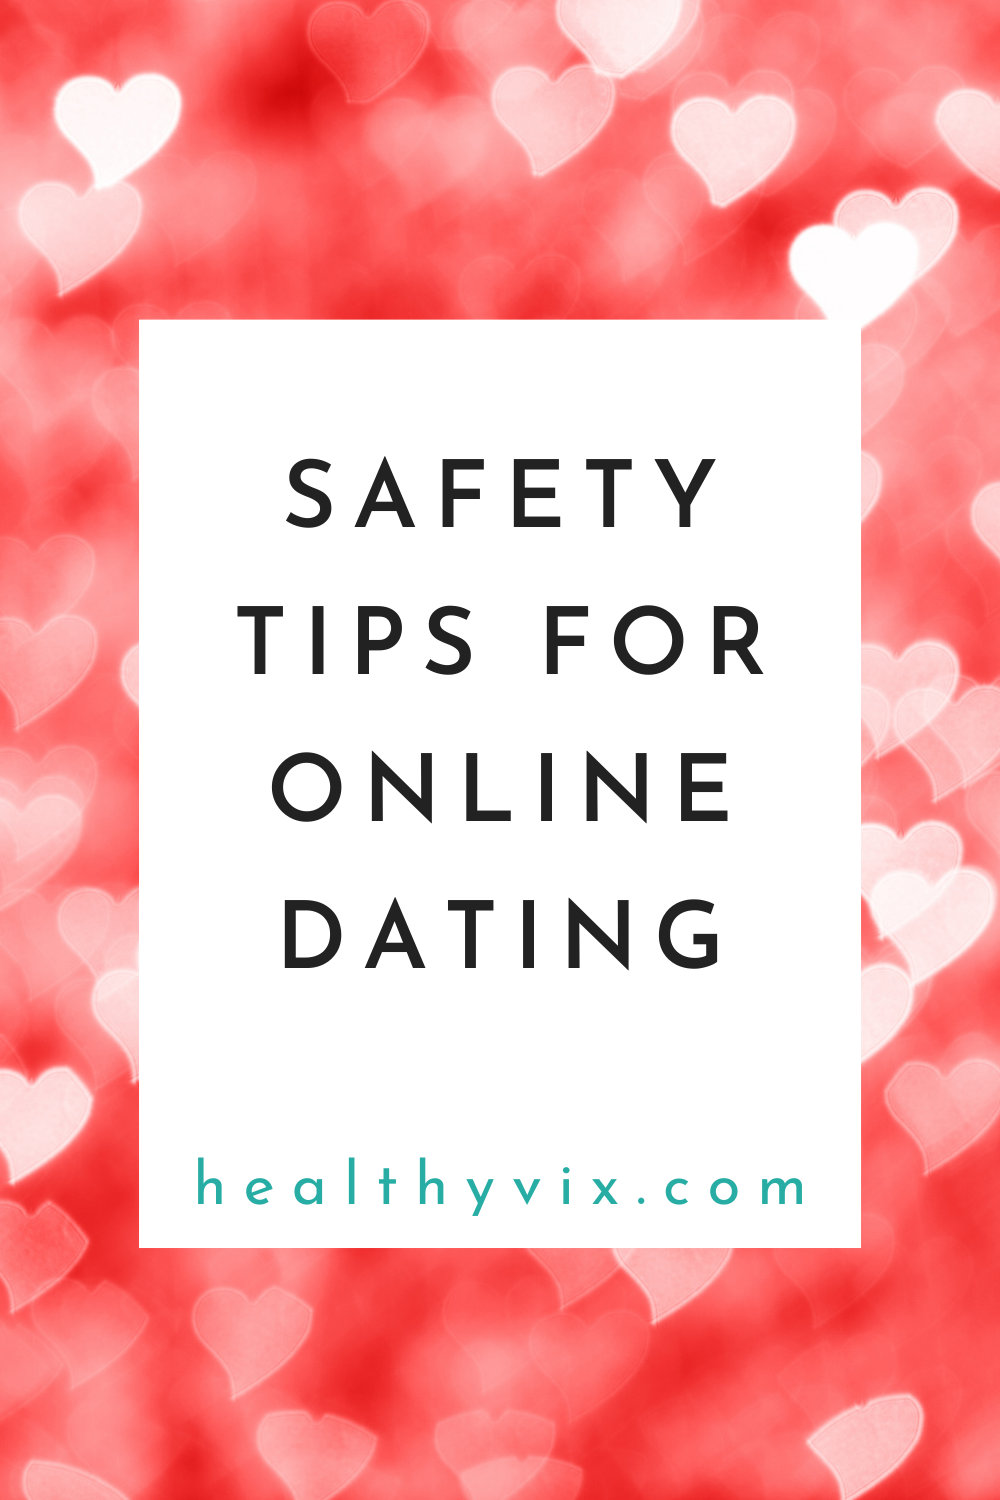 Safety tips for online dating